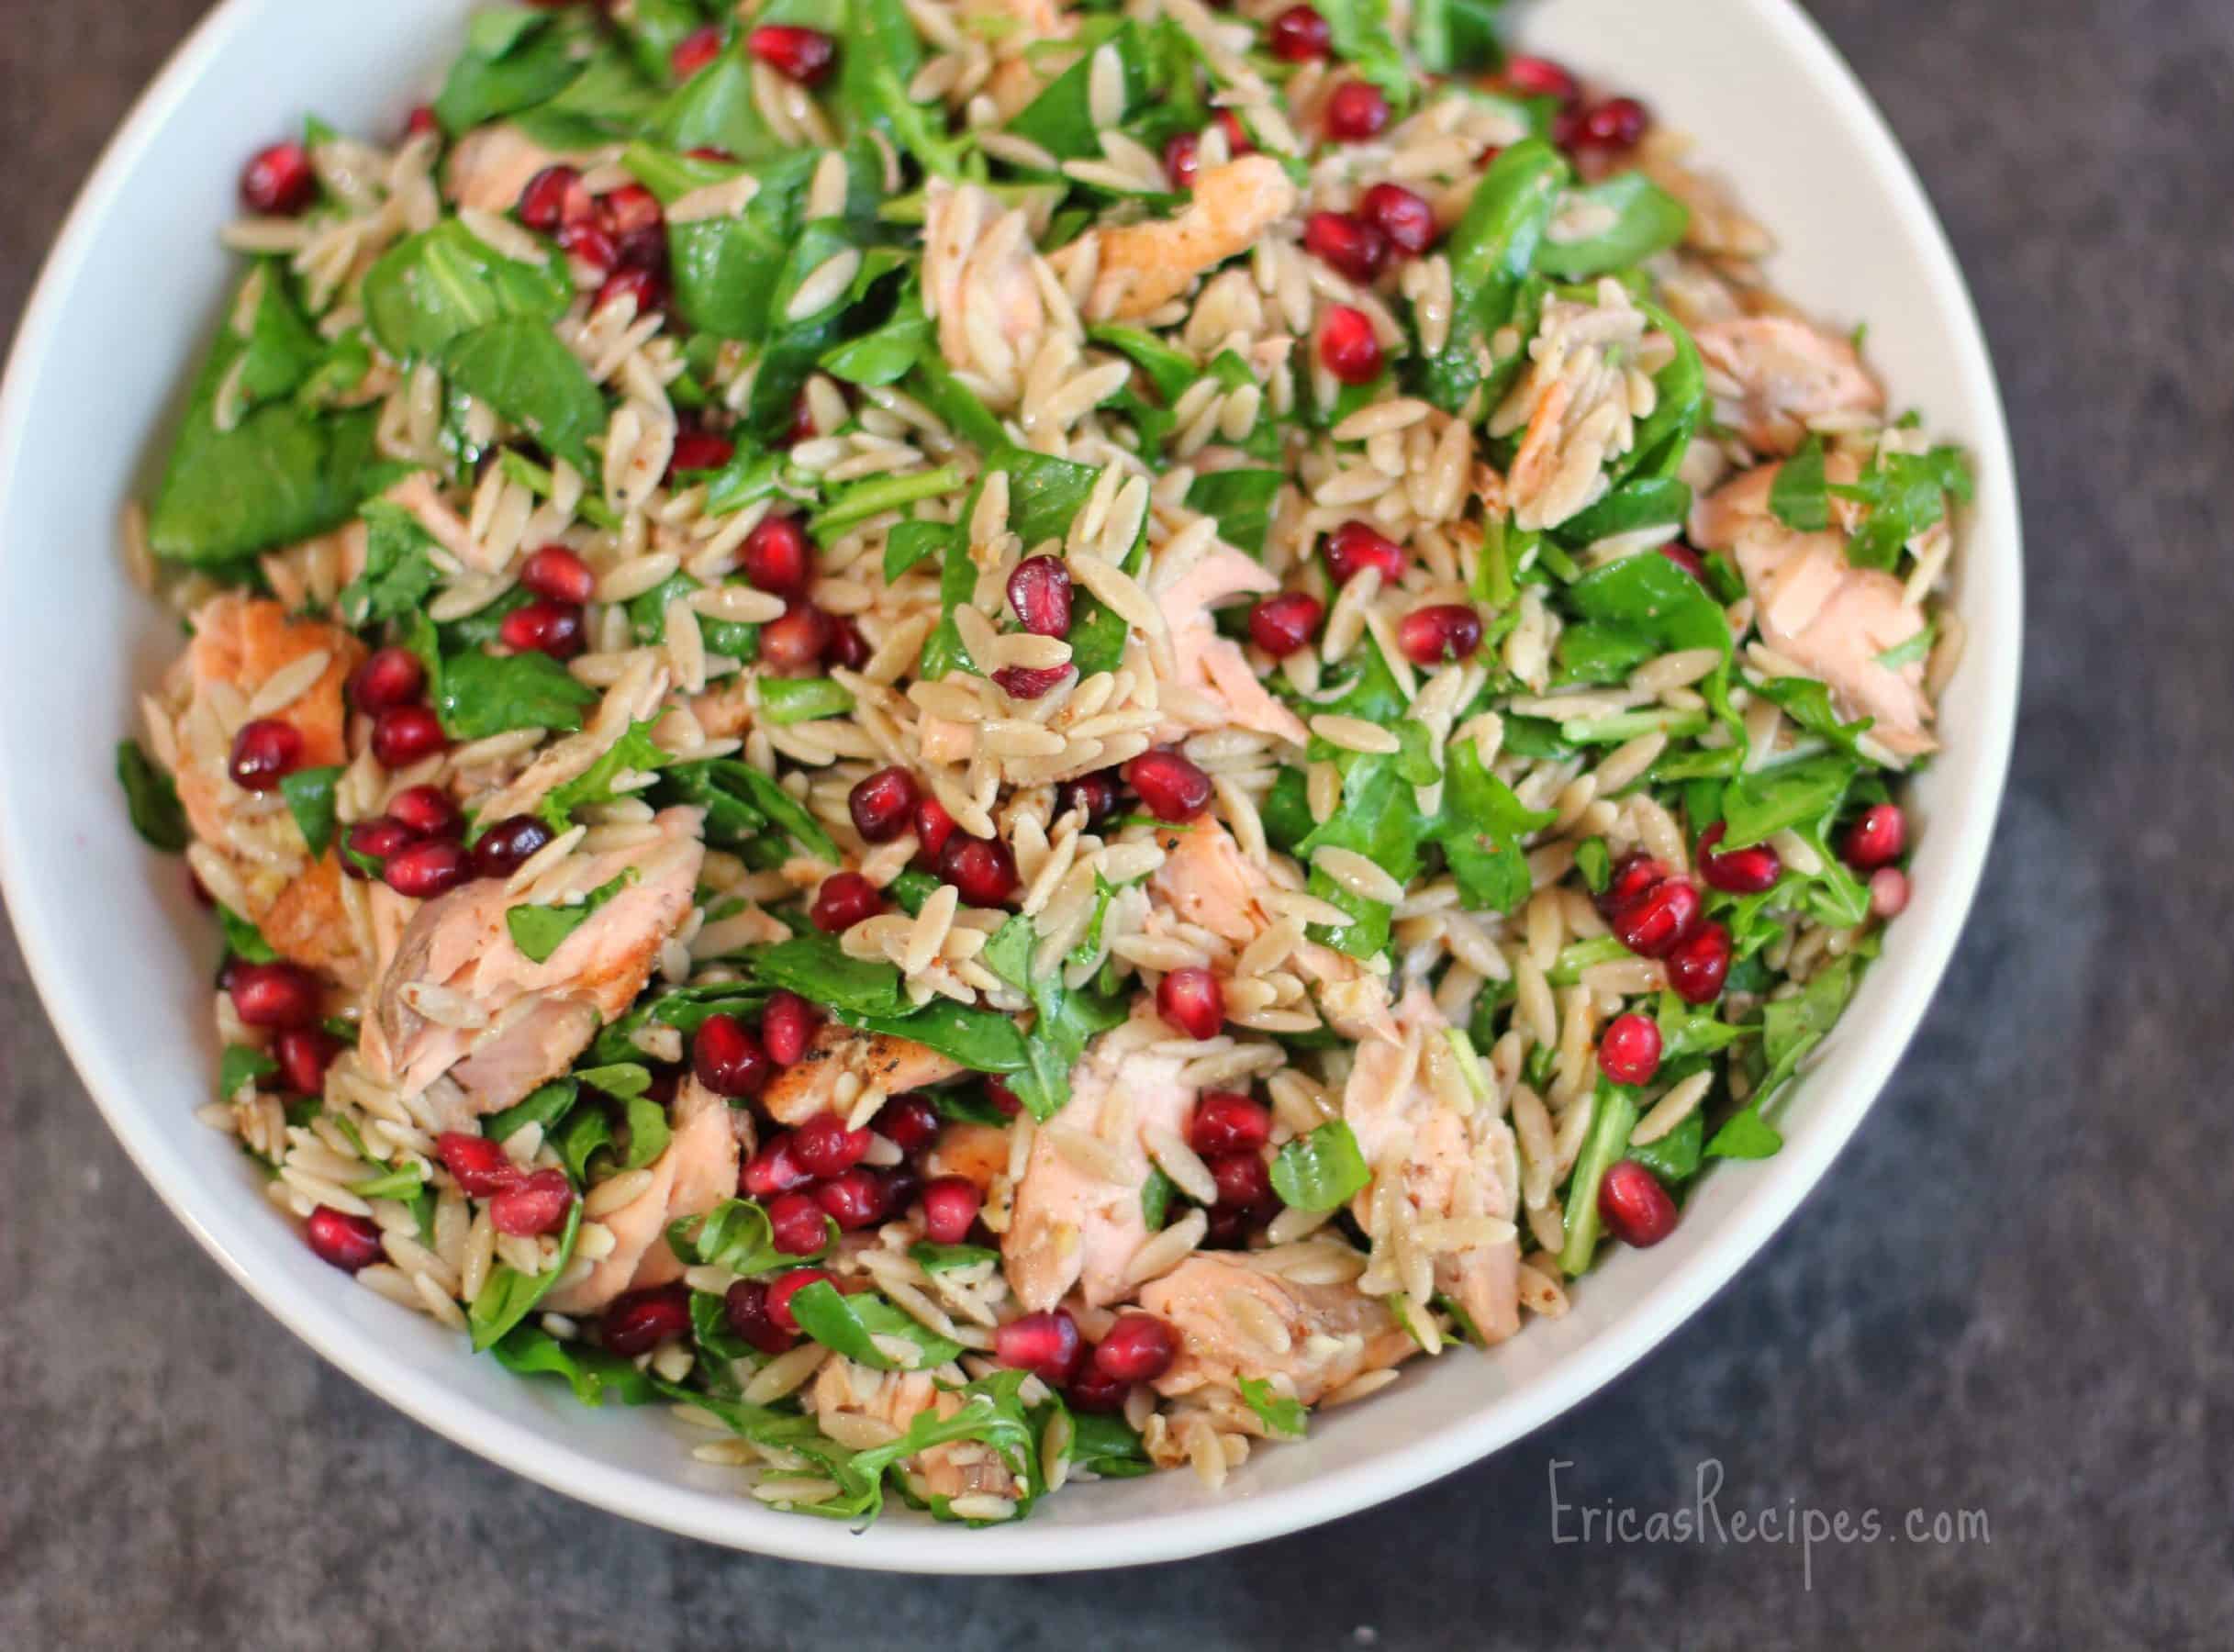 Orzo Power Salad with Salmon, Walnuts, and Greens